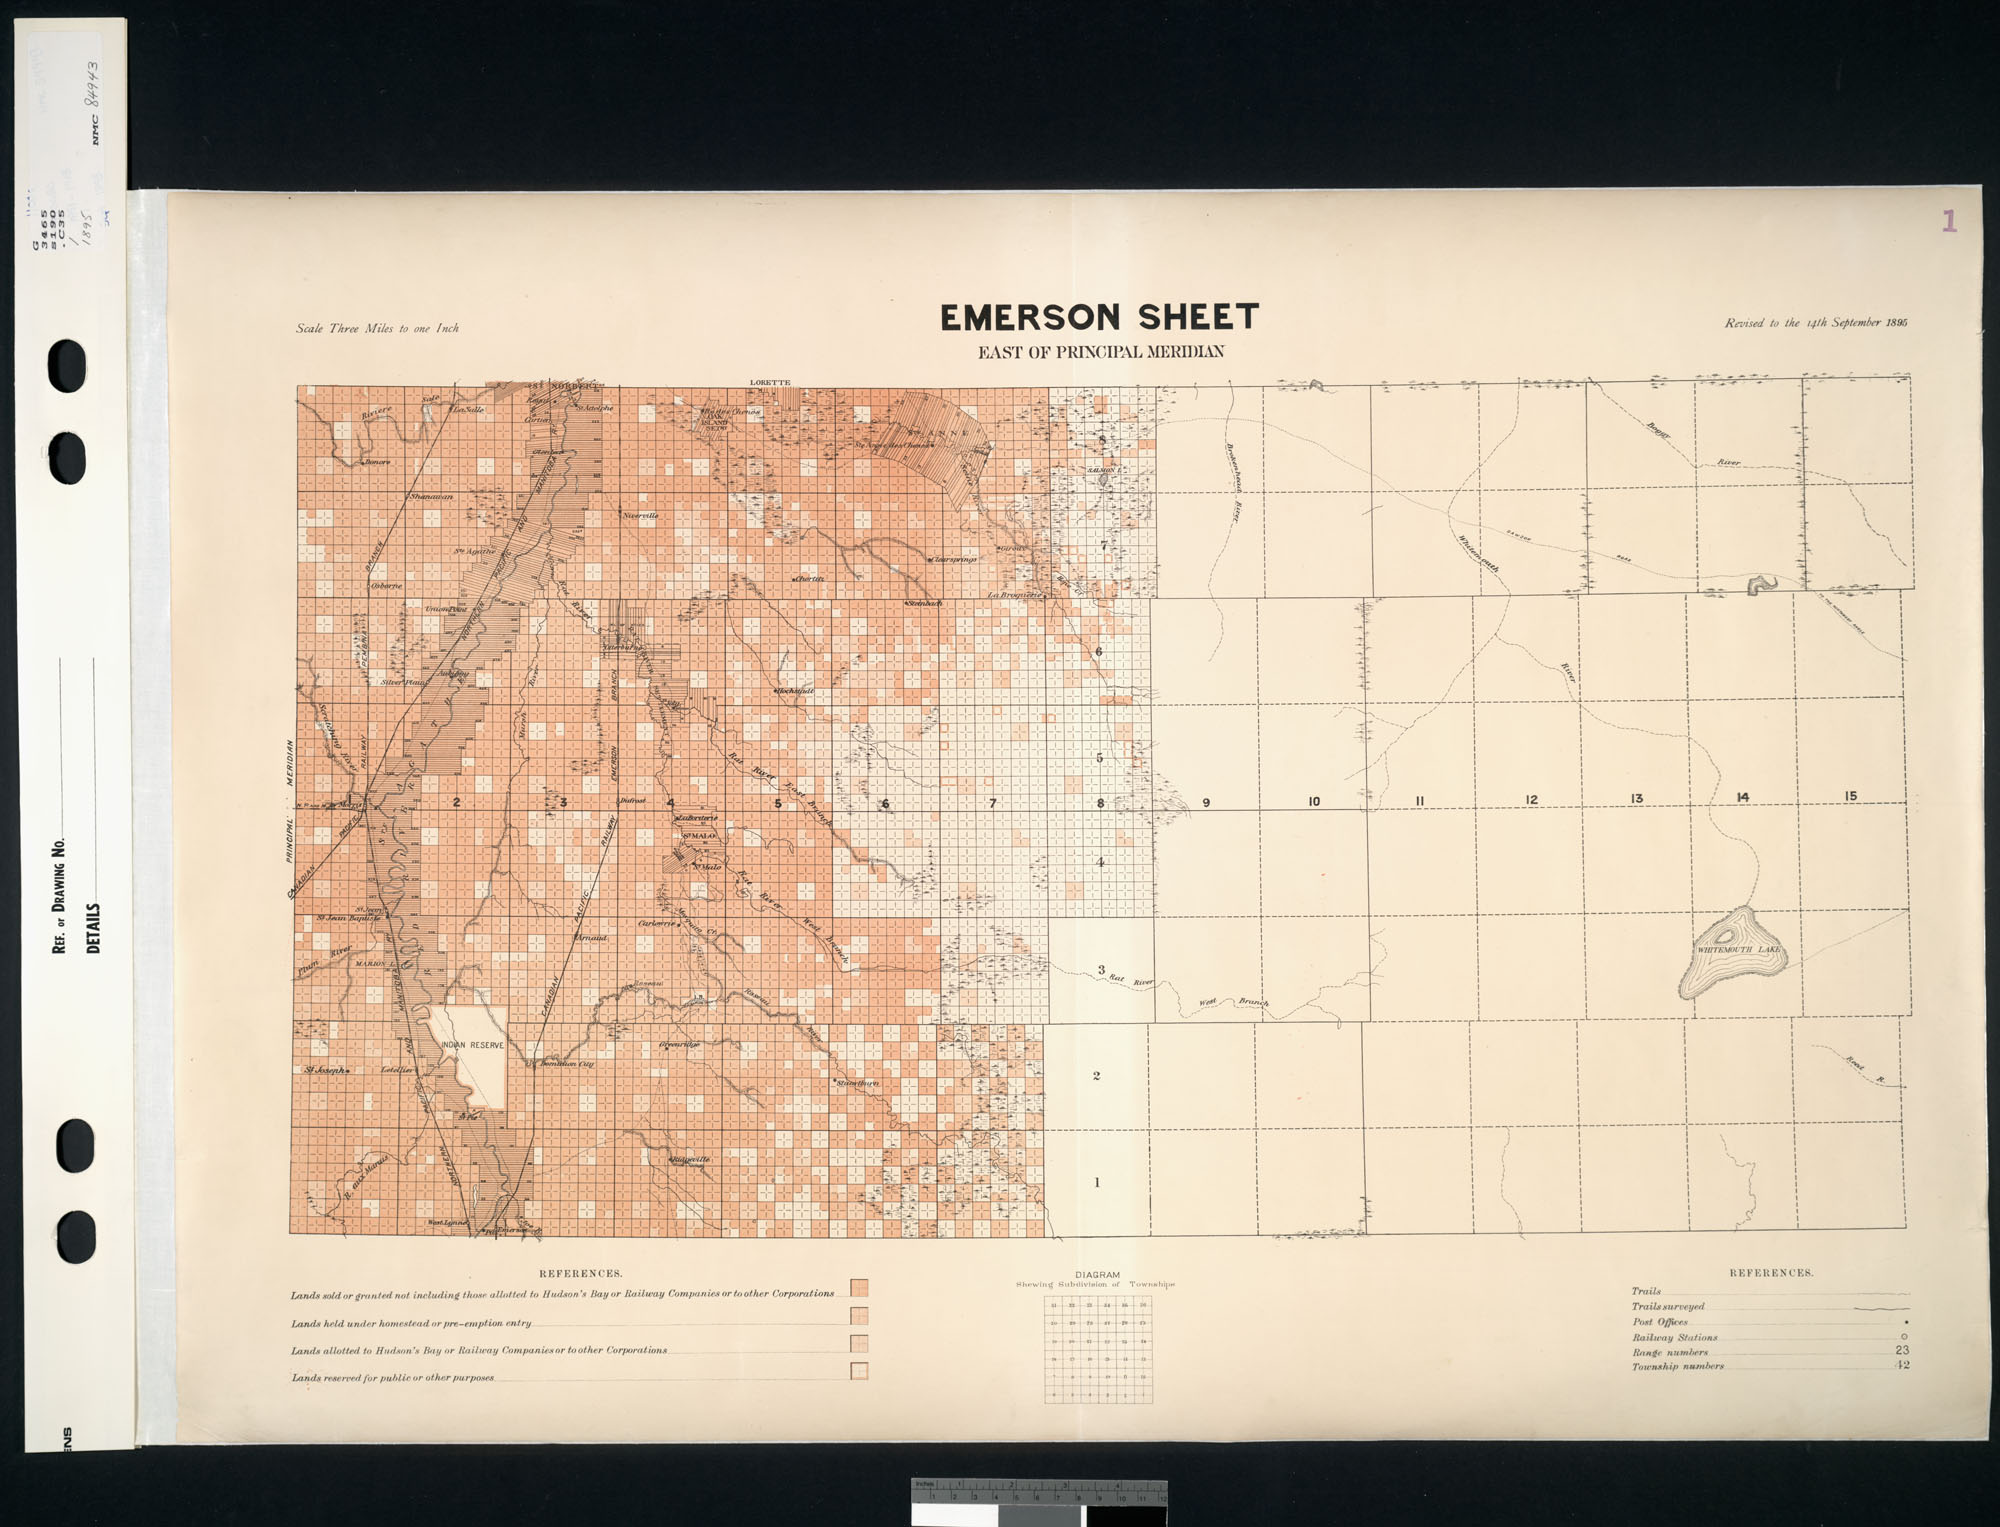 Digitized image of map no. 1, Emerson, east of principal meridian, MIKAN 3695976, image number e002419242